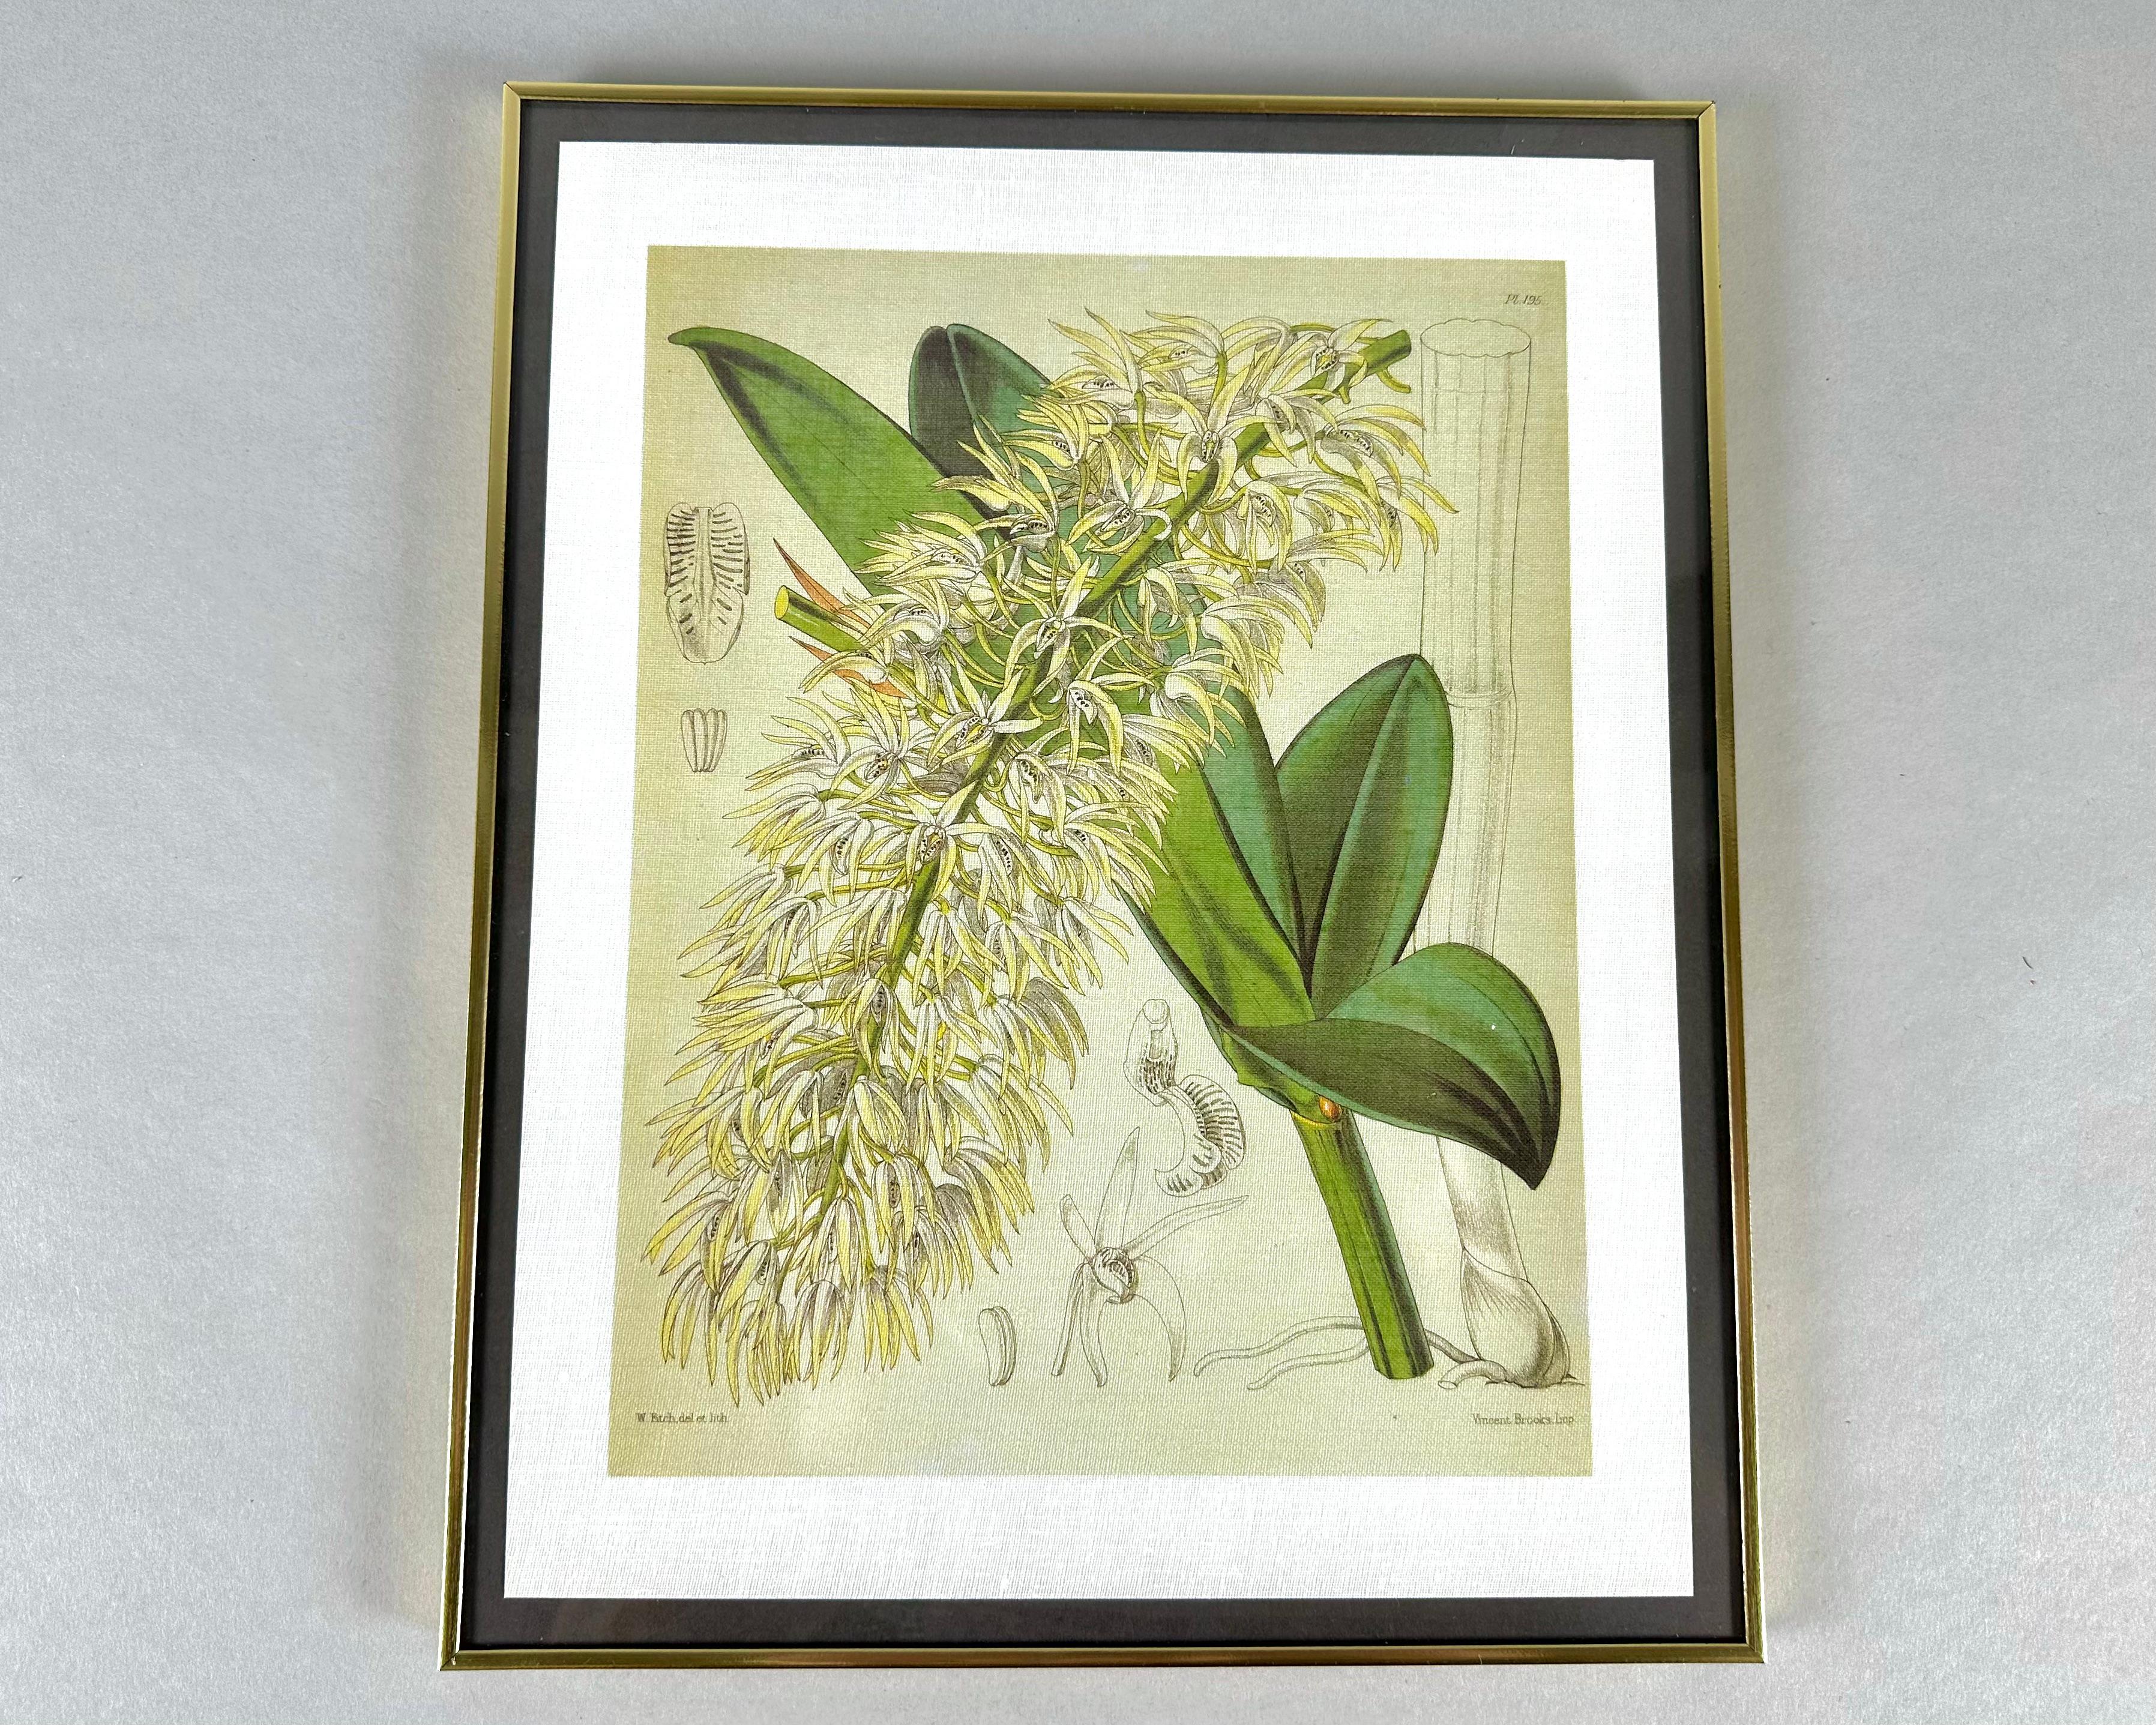 Set of 2 vintage botanical textile  prints in beautiful gold frames.

Wonderful details, colors and natural history feel.

The paintings are images of Dendrobium hillii and Christmas orchids made in natural colors.

Flowers create an atmosphere of